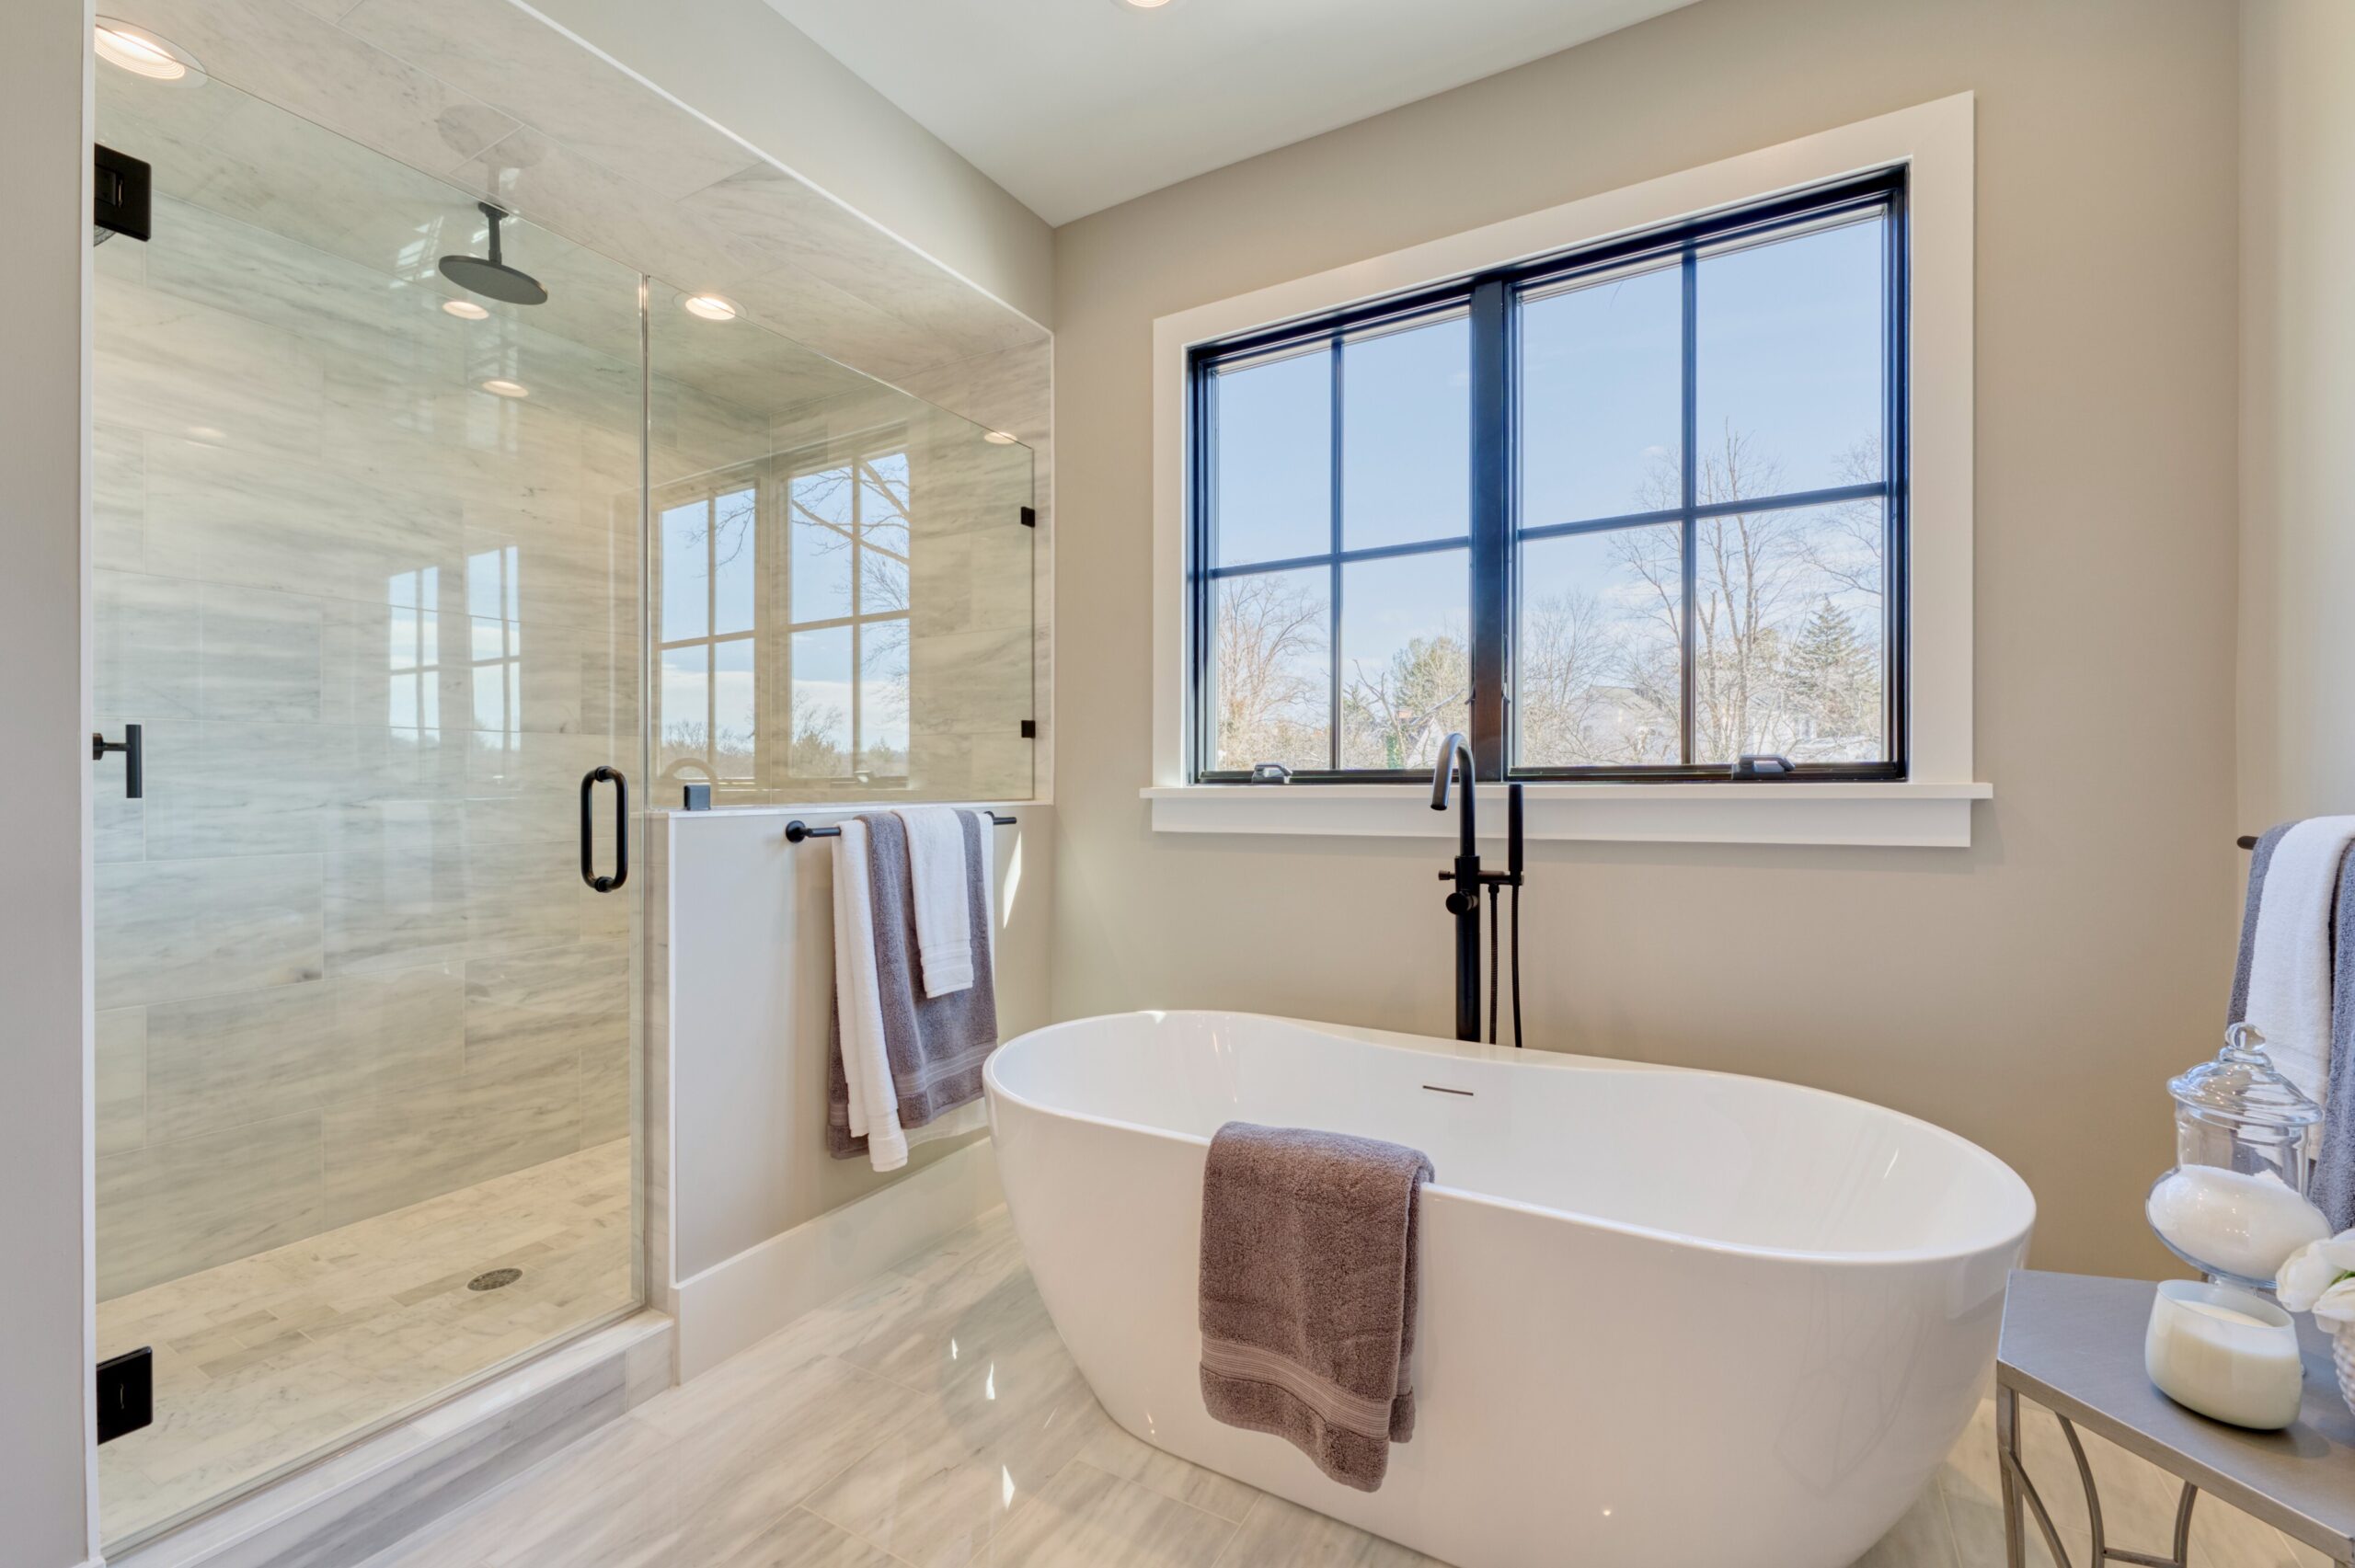 Professional interior photo of 1624 Dempsey St, McLean, VA - showing the primary bathroom with soaking tup and large zero entry shower with rainhead